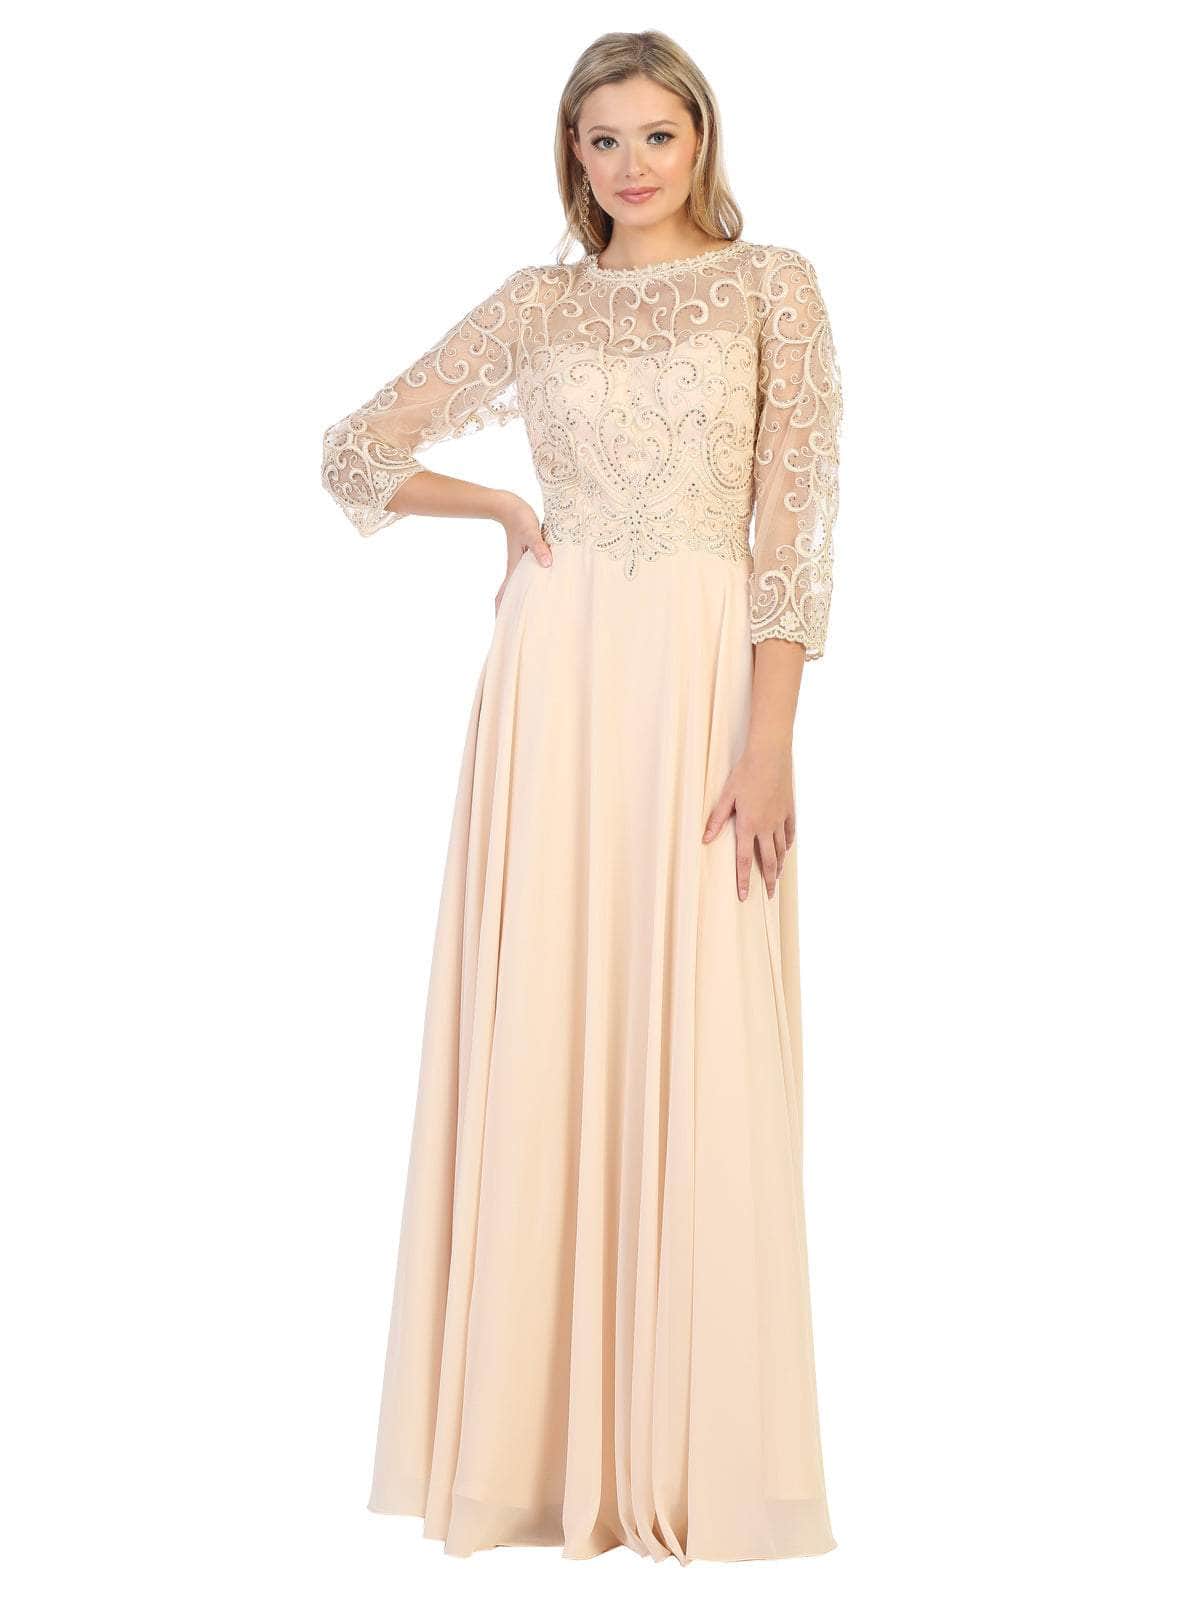 May Queen - MQ1706 Embroidered Illusion Jewel A-Line Dress Mother of the Bride Dresses M / Champagne